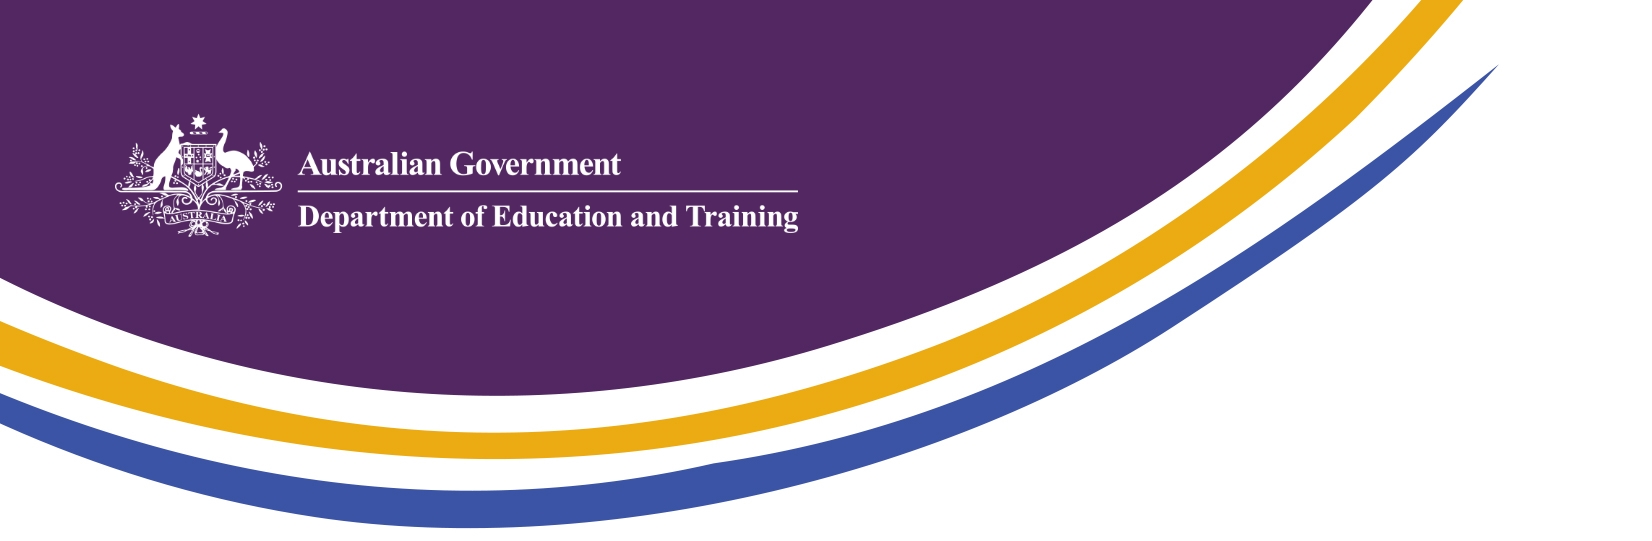 australian government of education and training